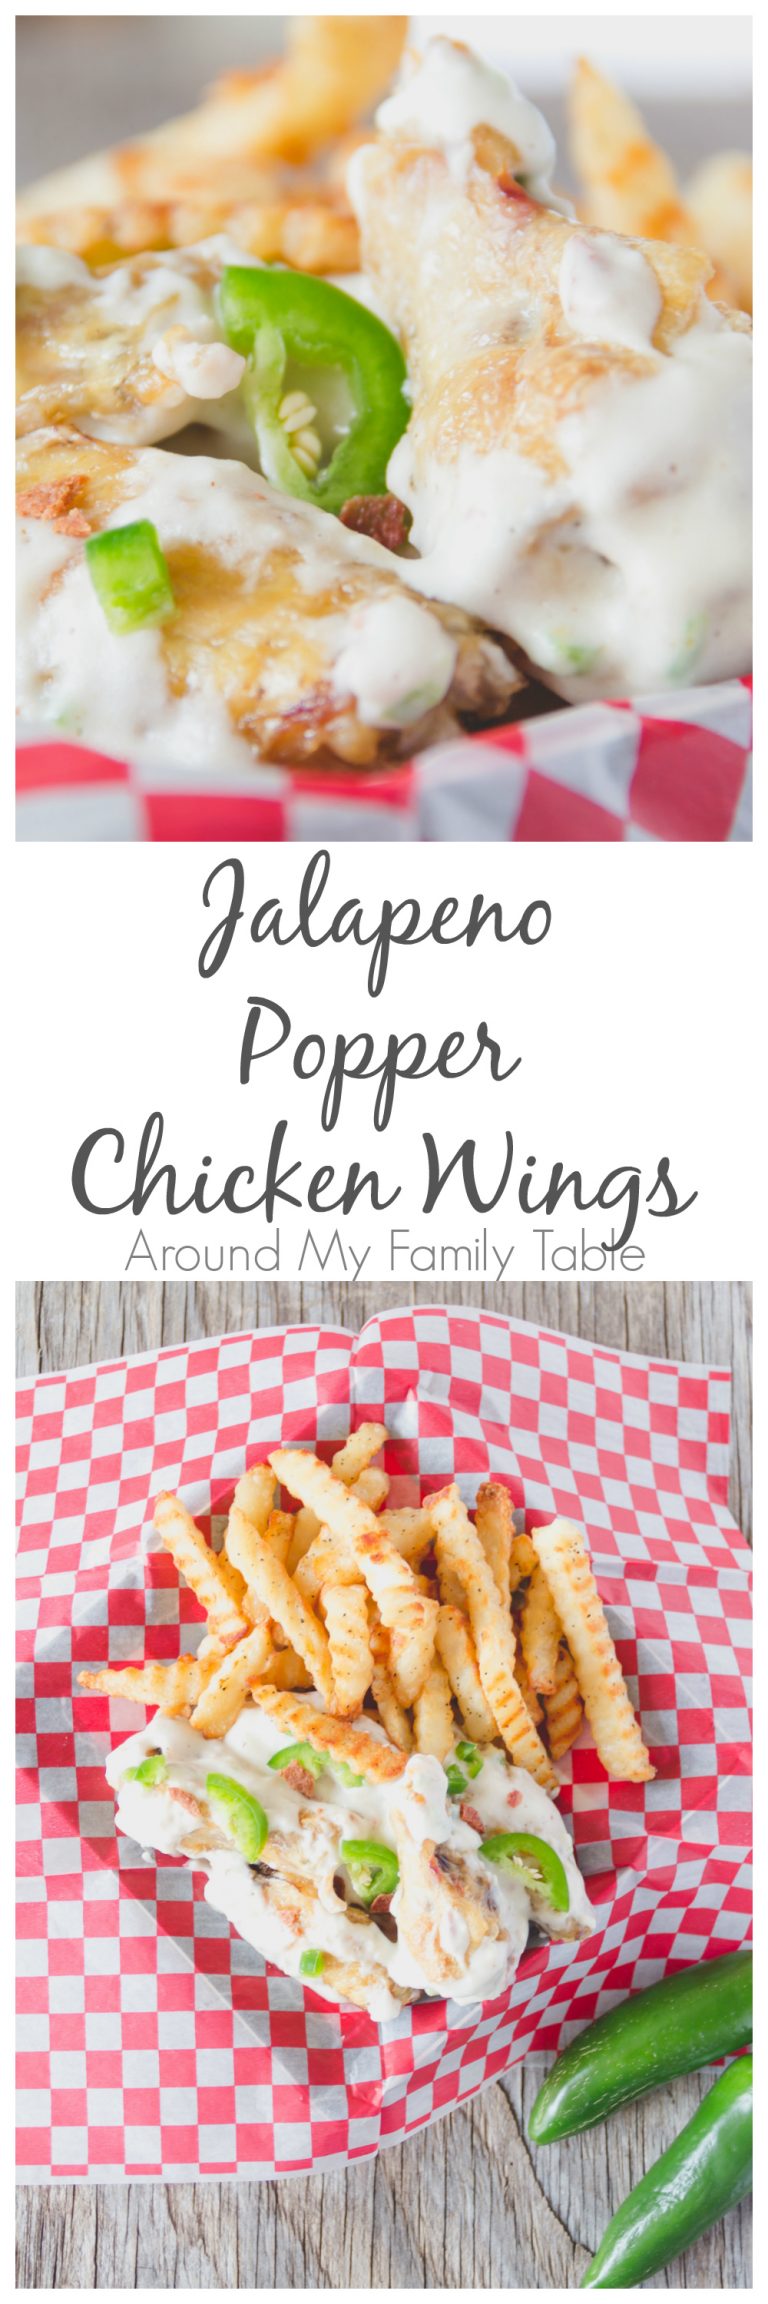 Jalapeno Popper Chicken Wings - Around My Family Table